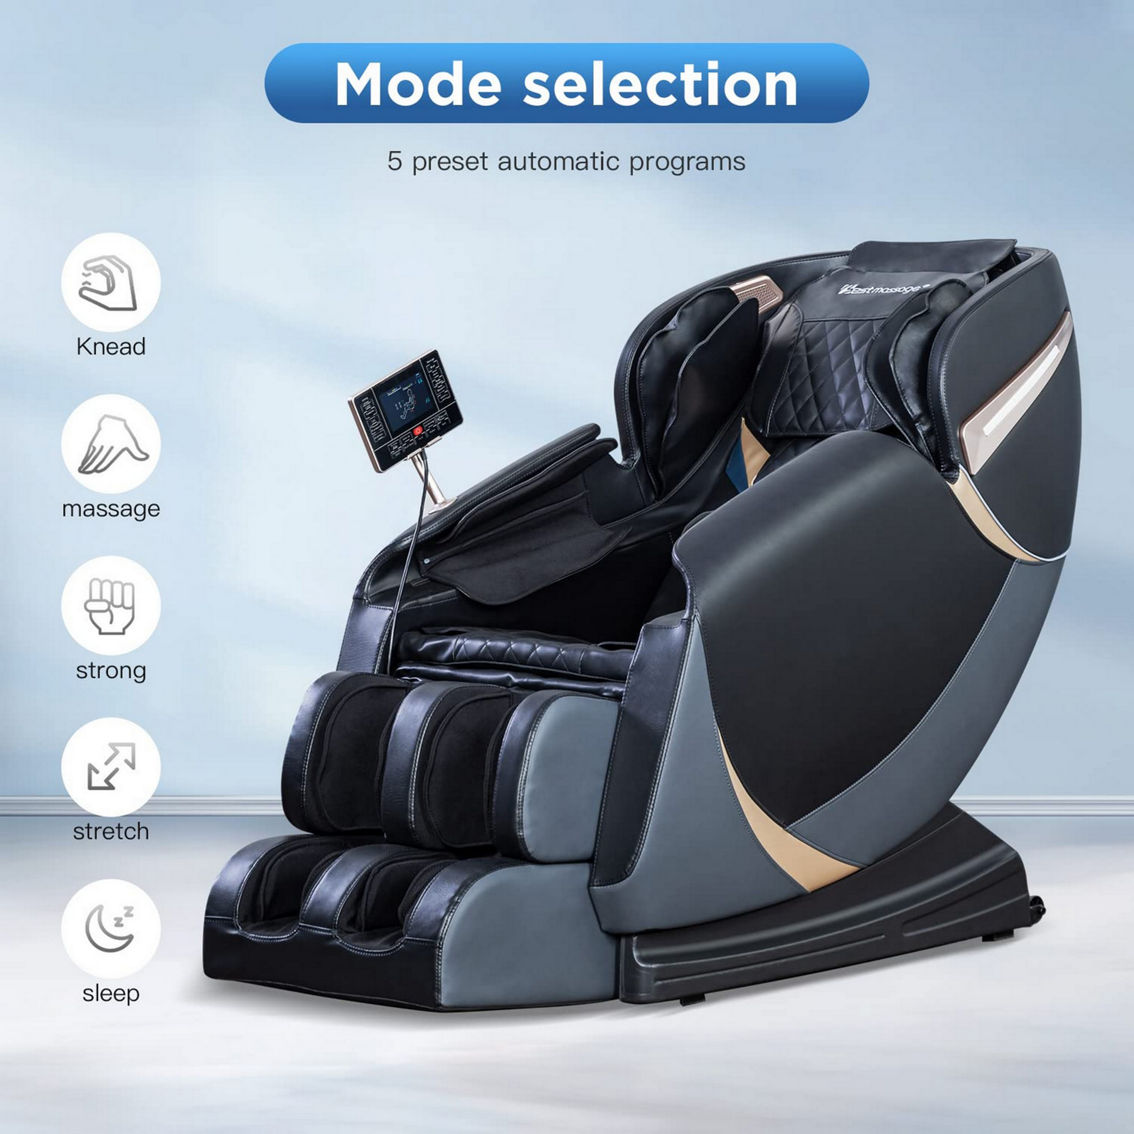 Furniture of America Monser Massage Chair - Image 5 of 10